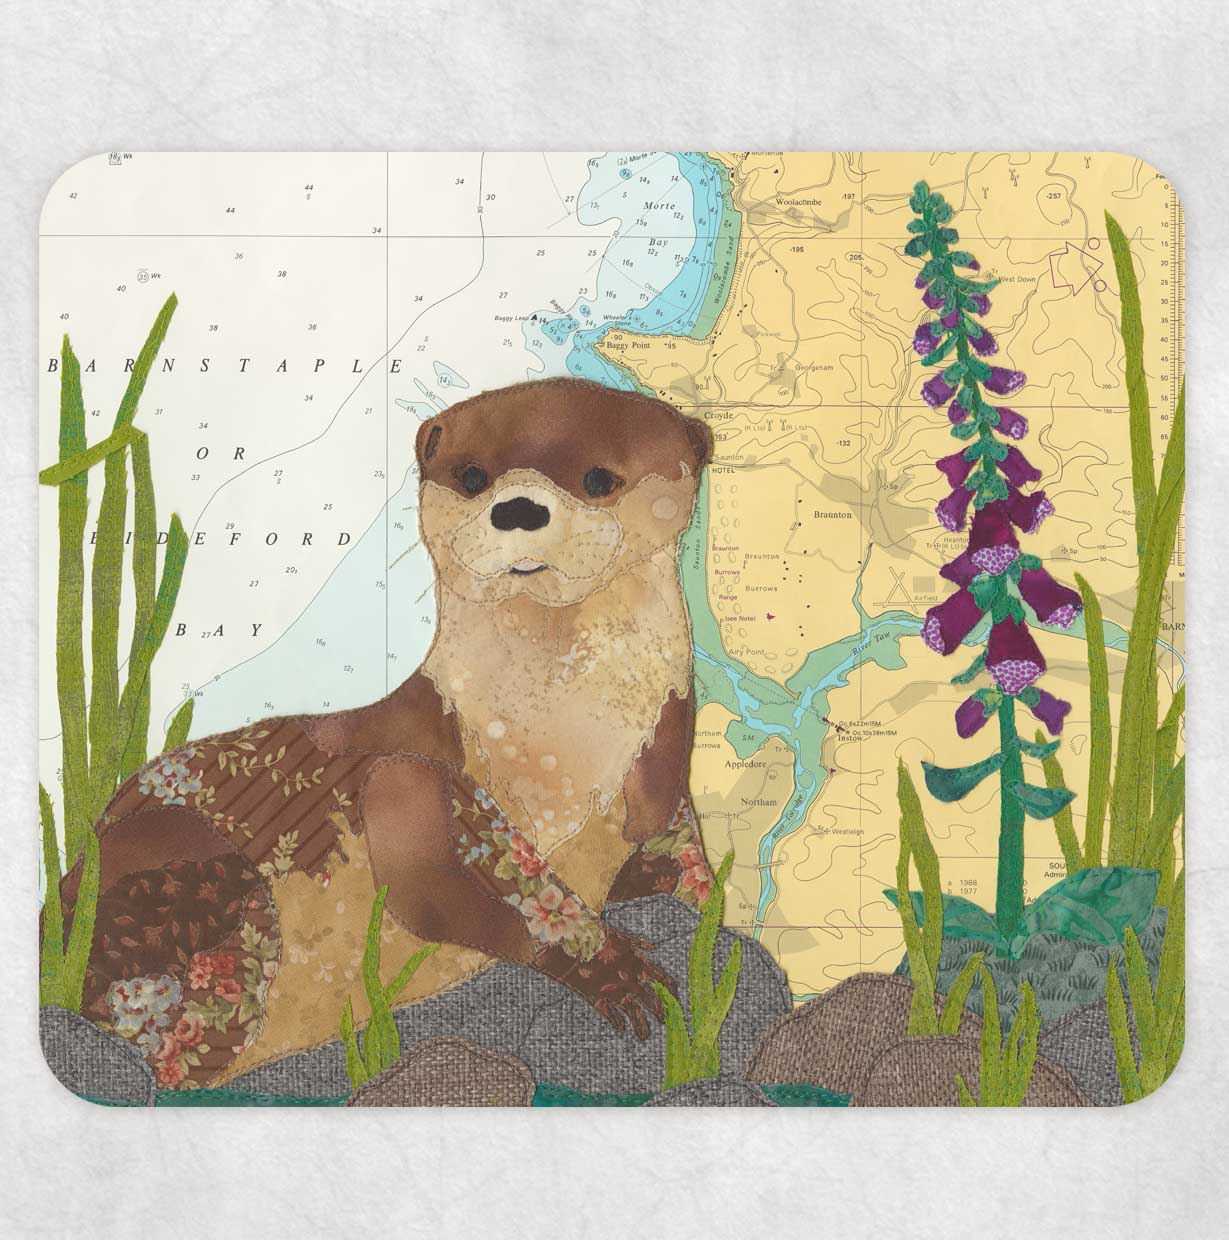 Placemat printed with a textile art design of an otter on an old sea chart